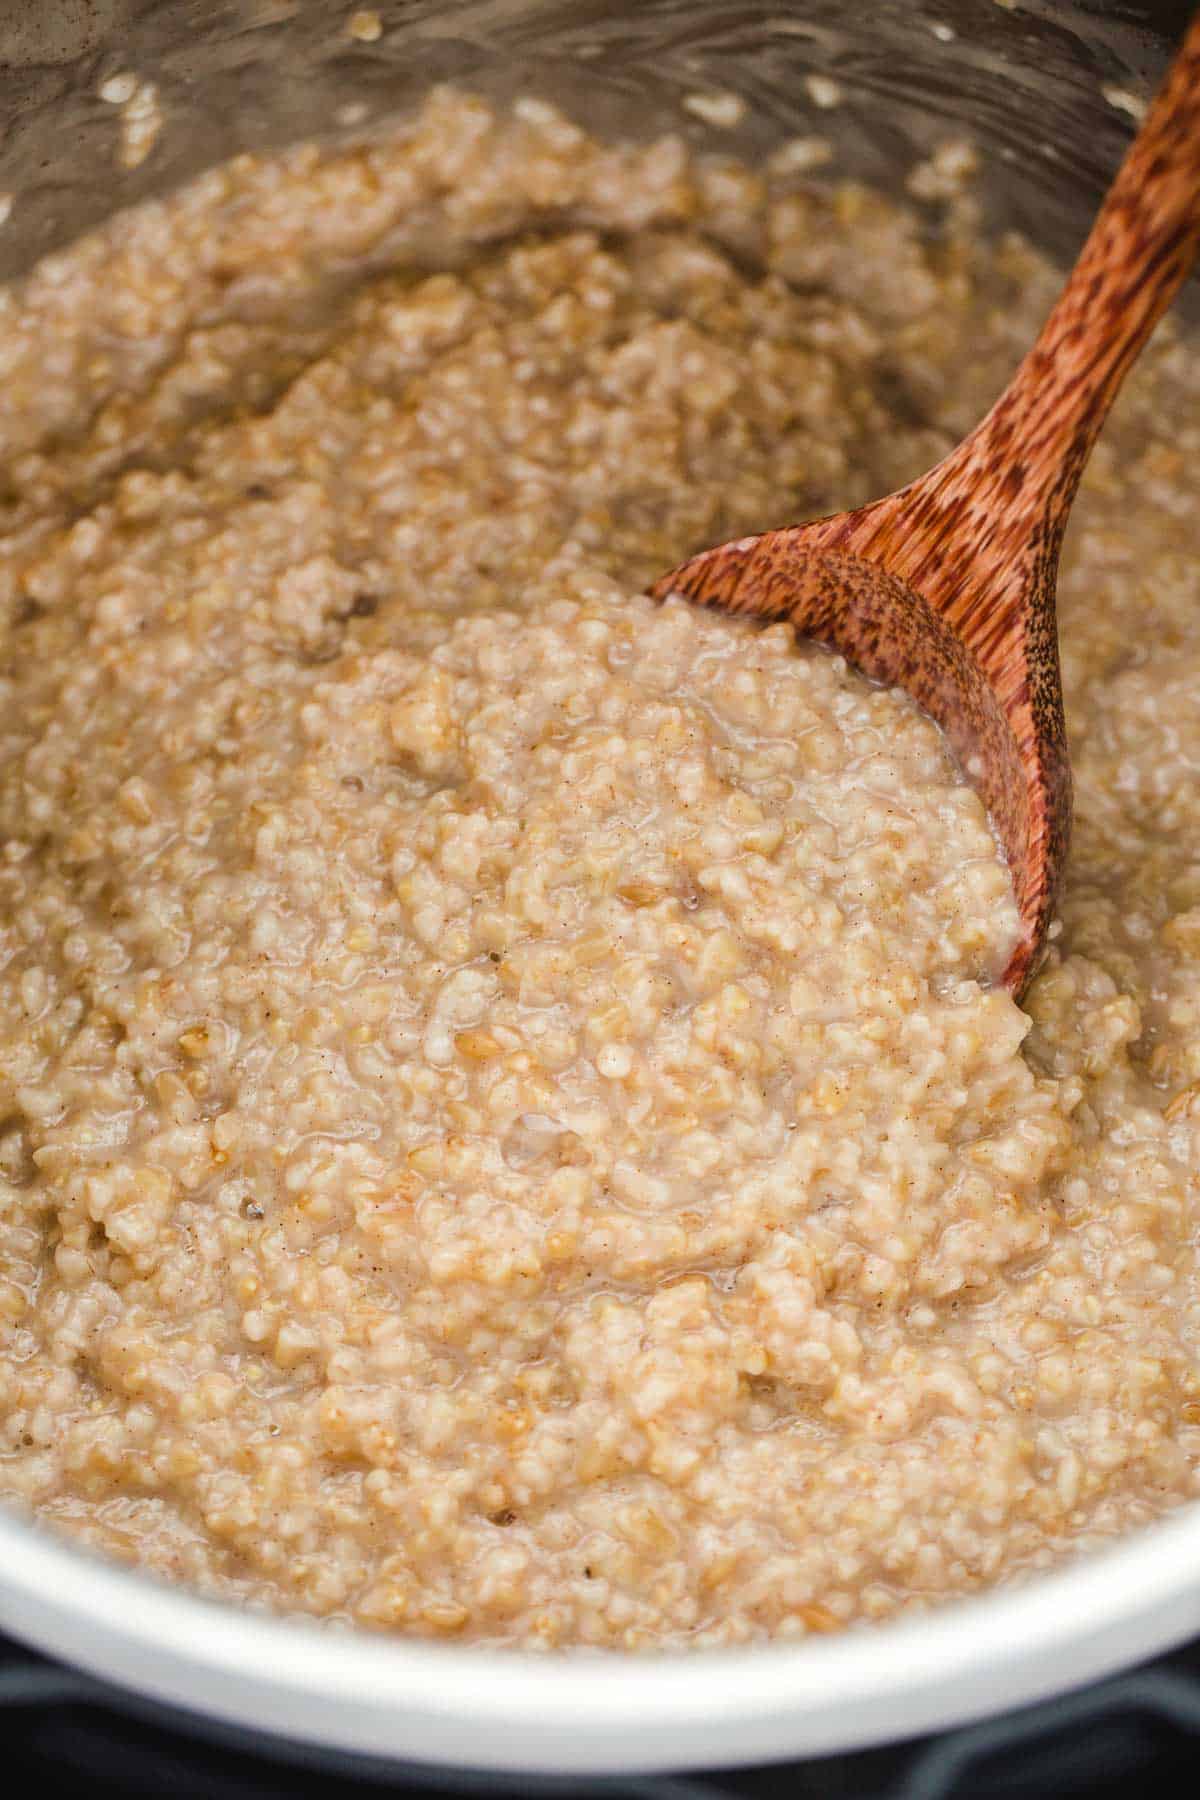 The texture of cooked oats in Instant Pot